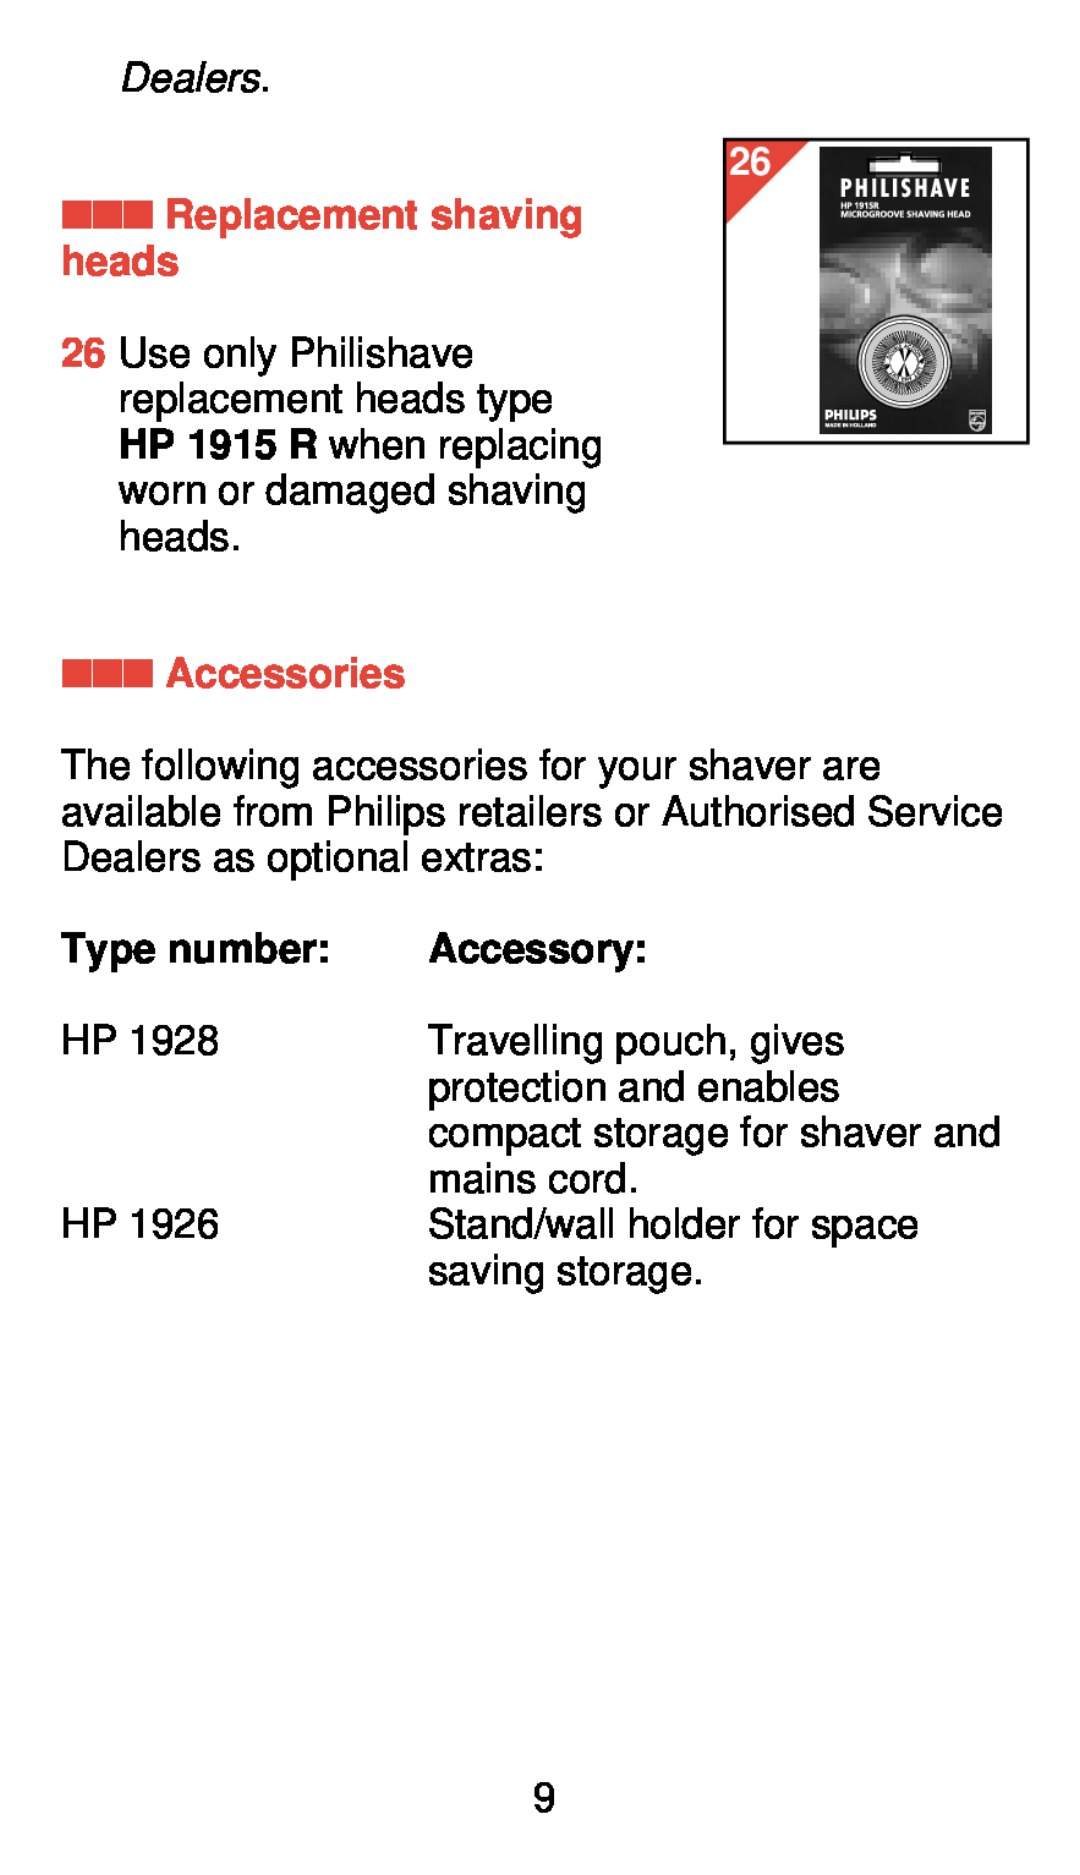 Philips 775 manual Replacement shaving heads, Accessories, Type number, Accessory 